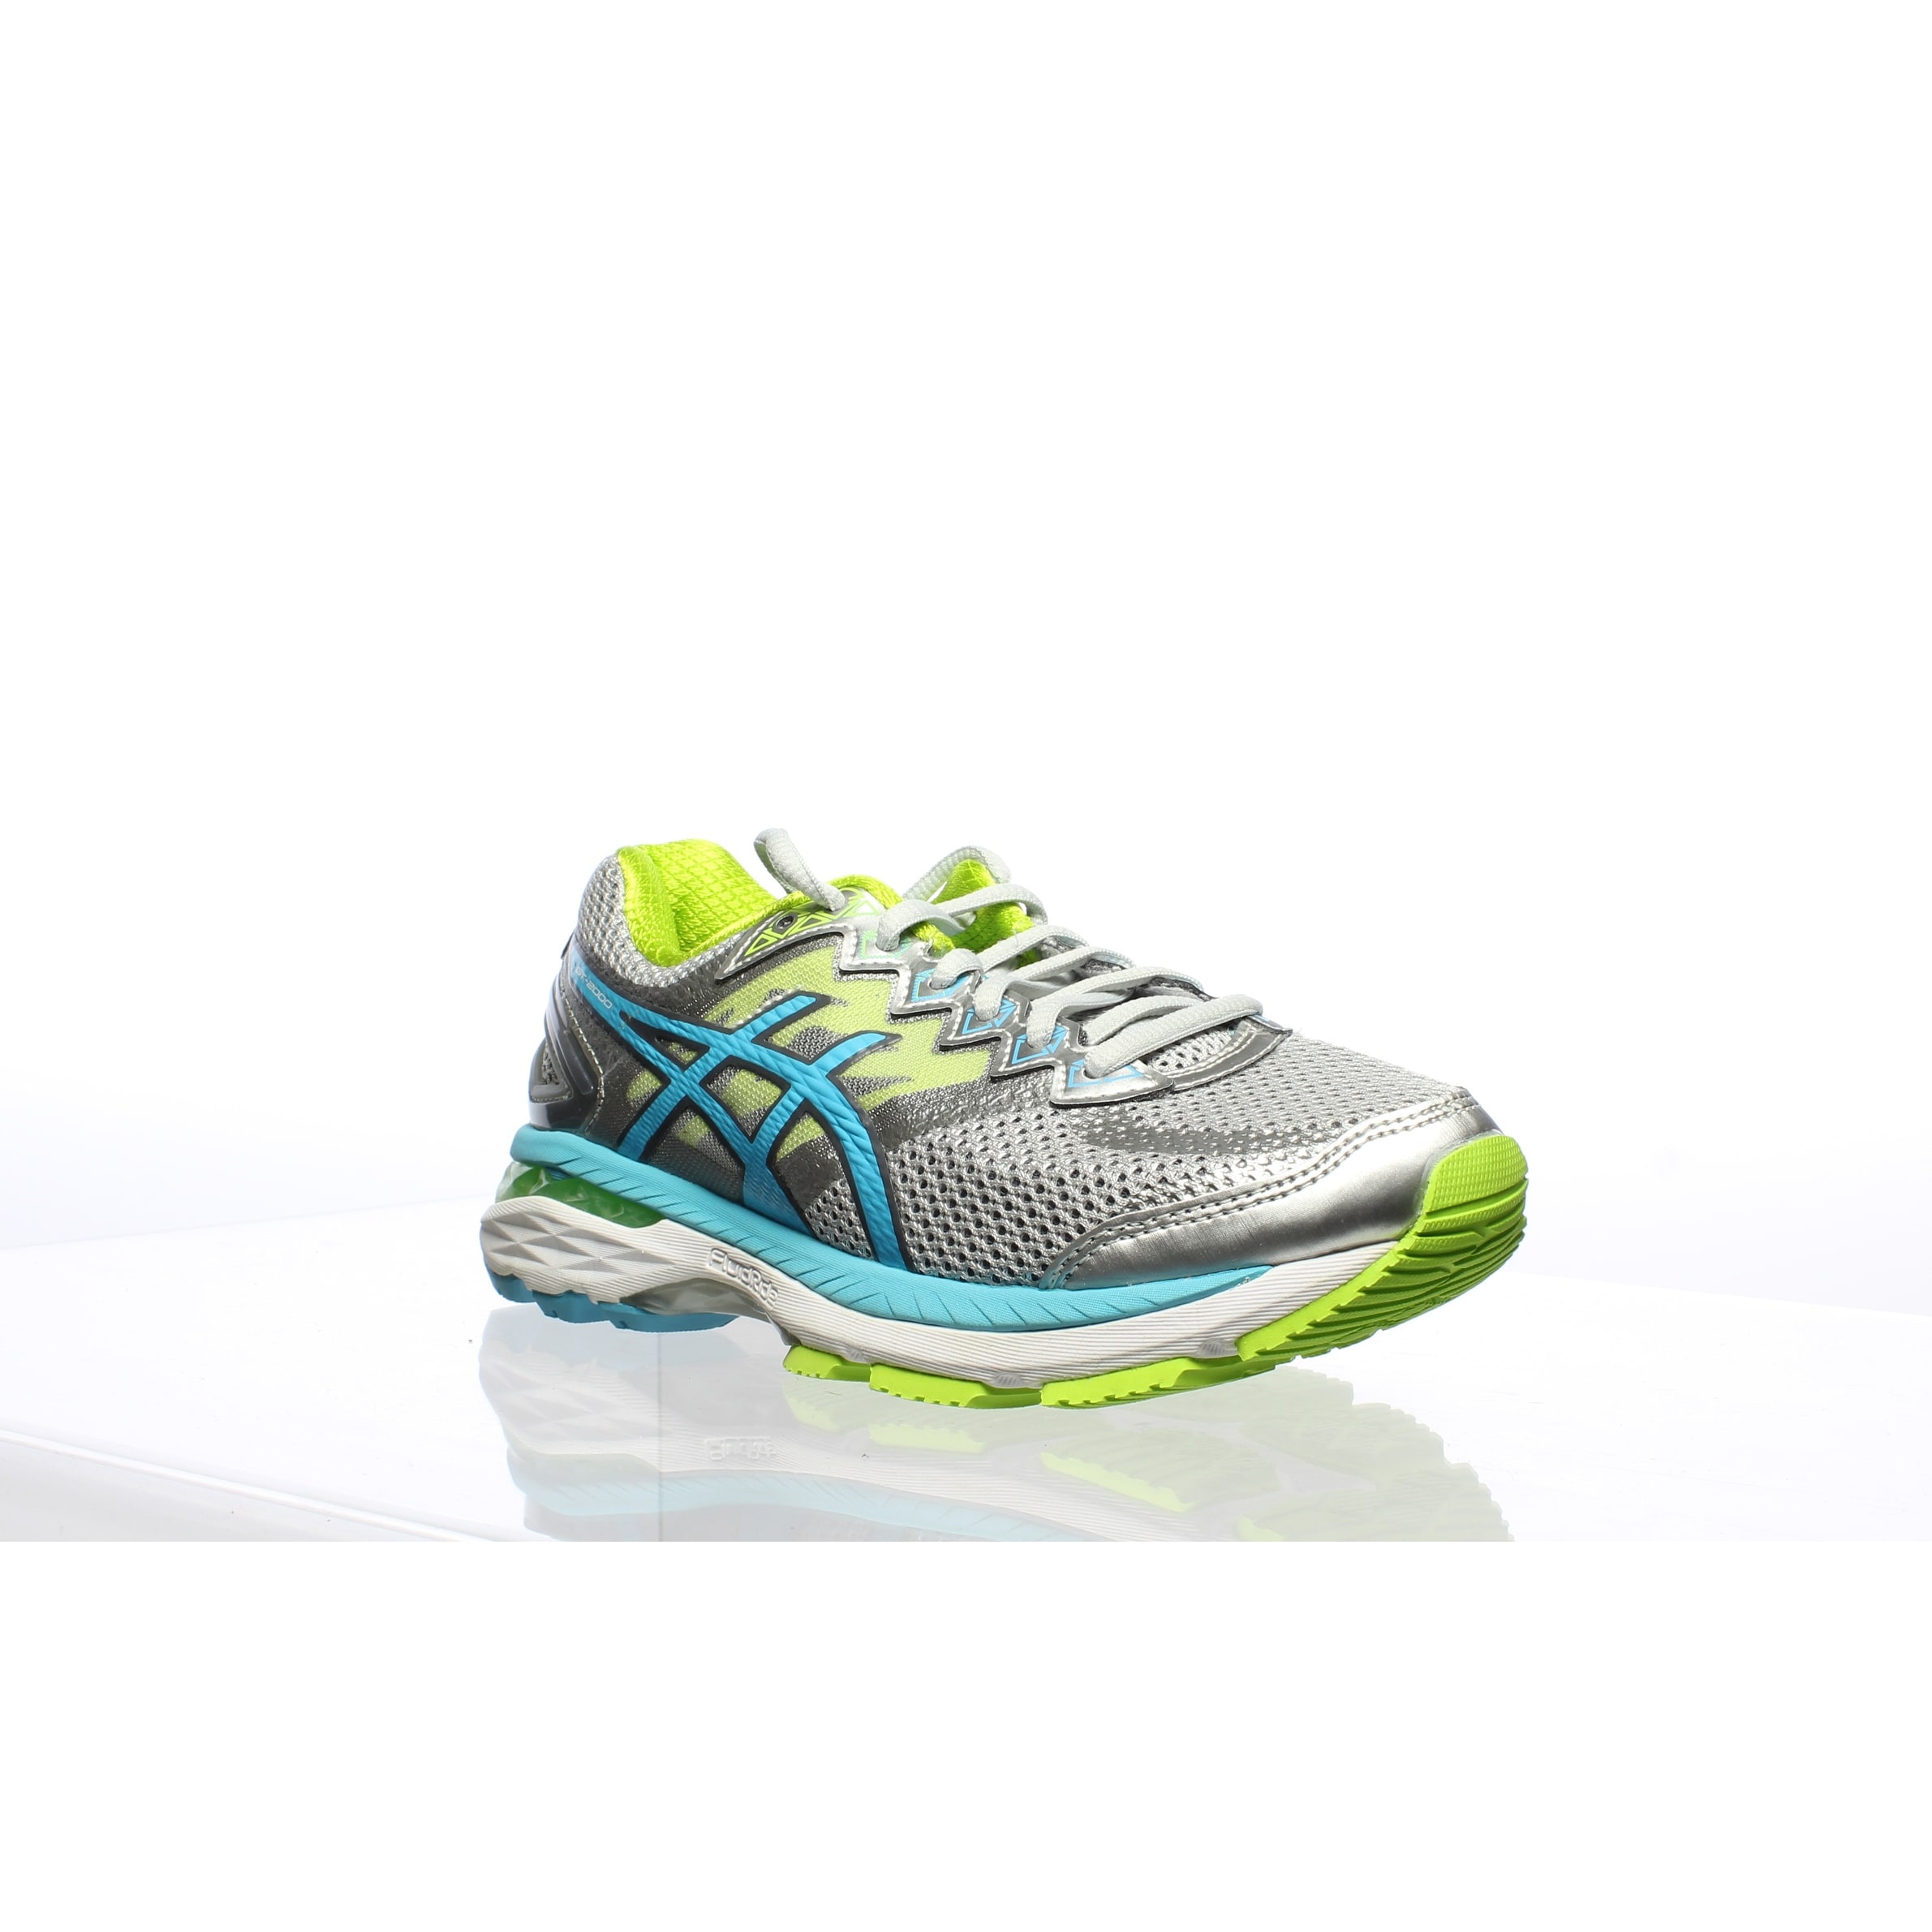 Gt-2000 4 Silver Running Shoes Size 